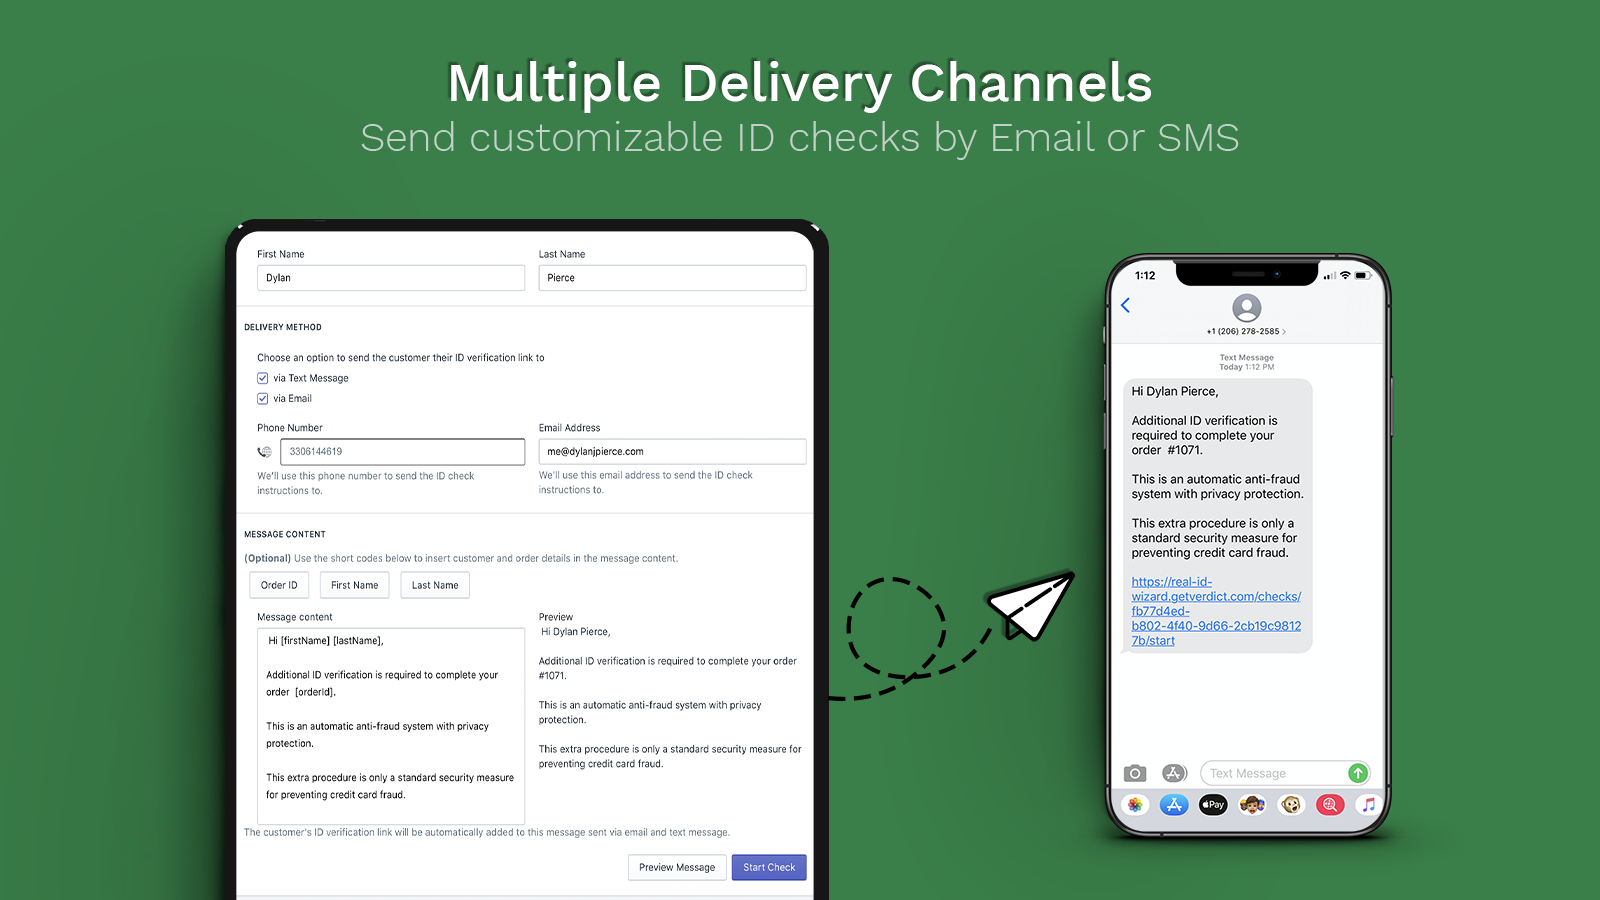 Send customizable ID checks to customers via SMS or Email